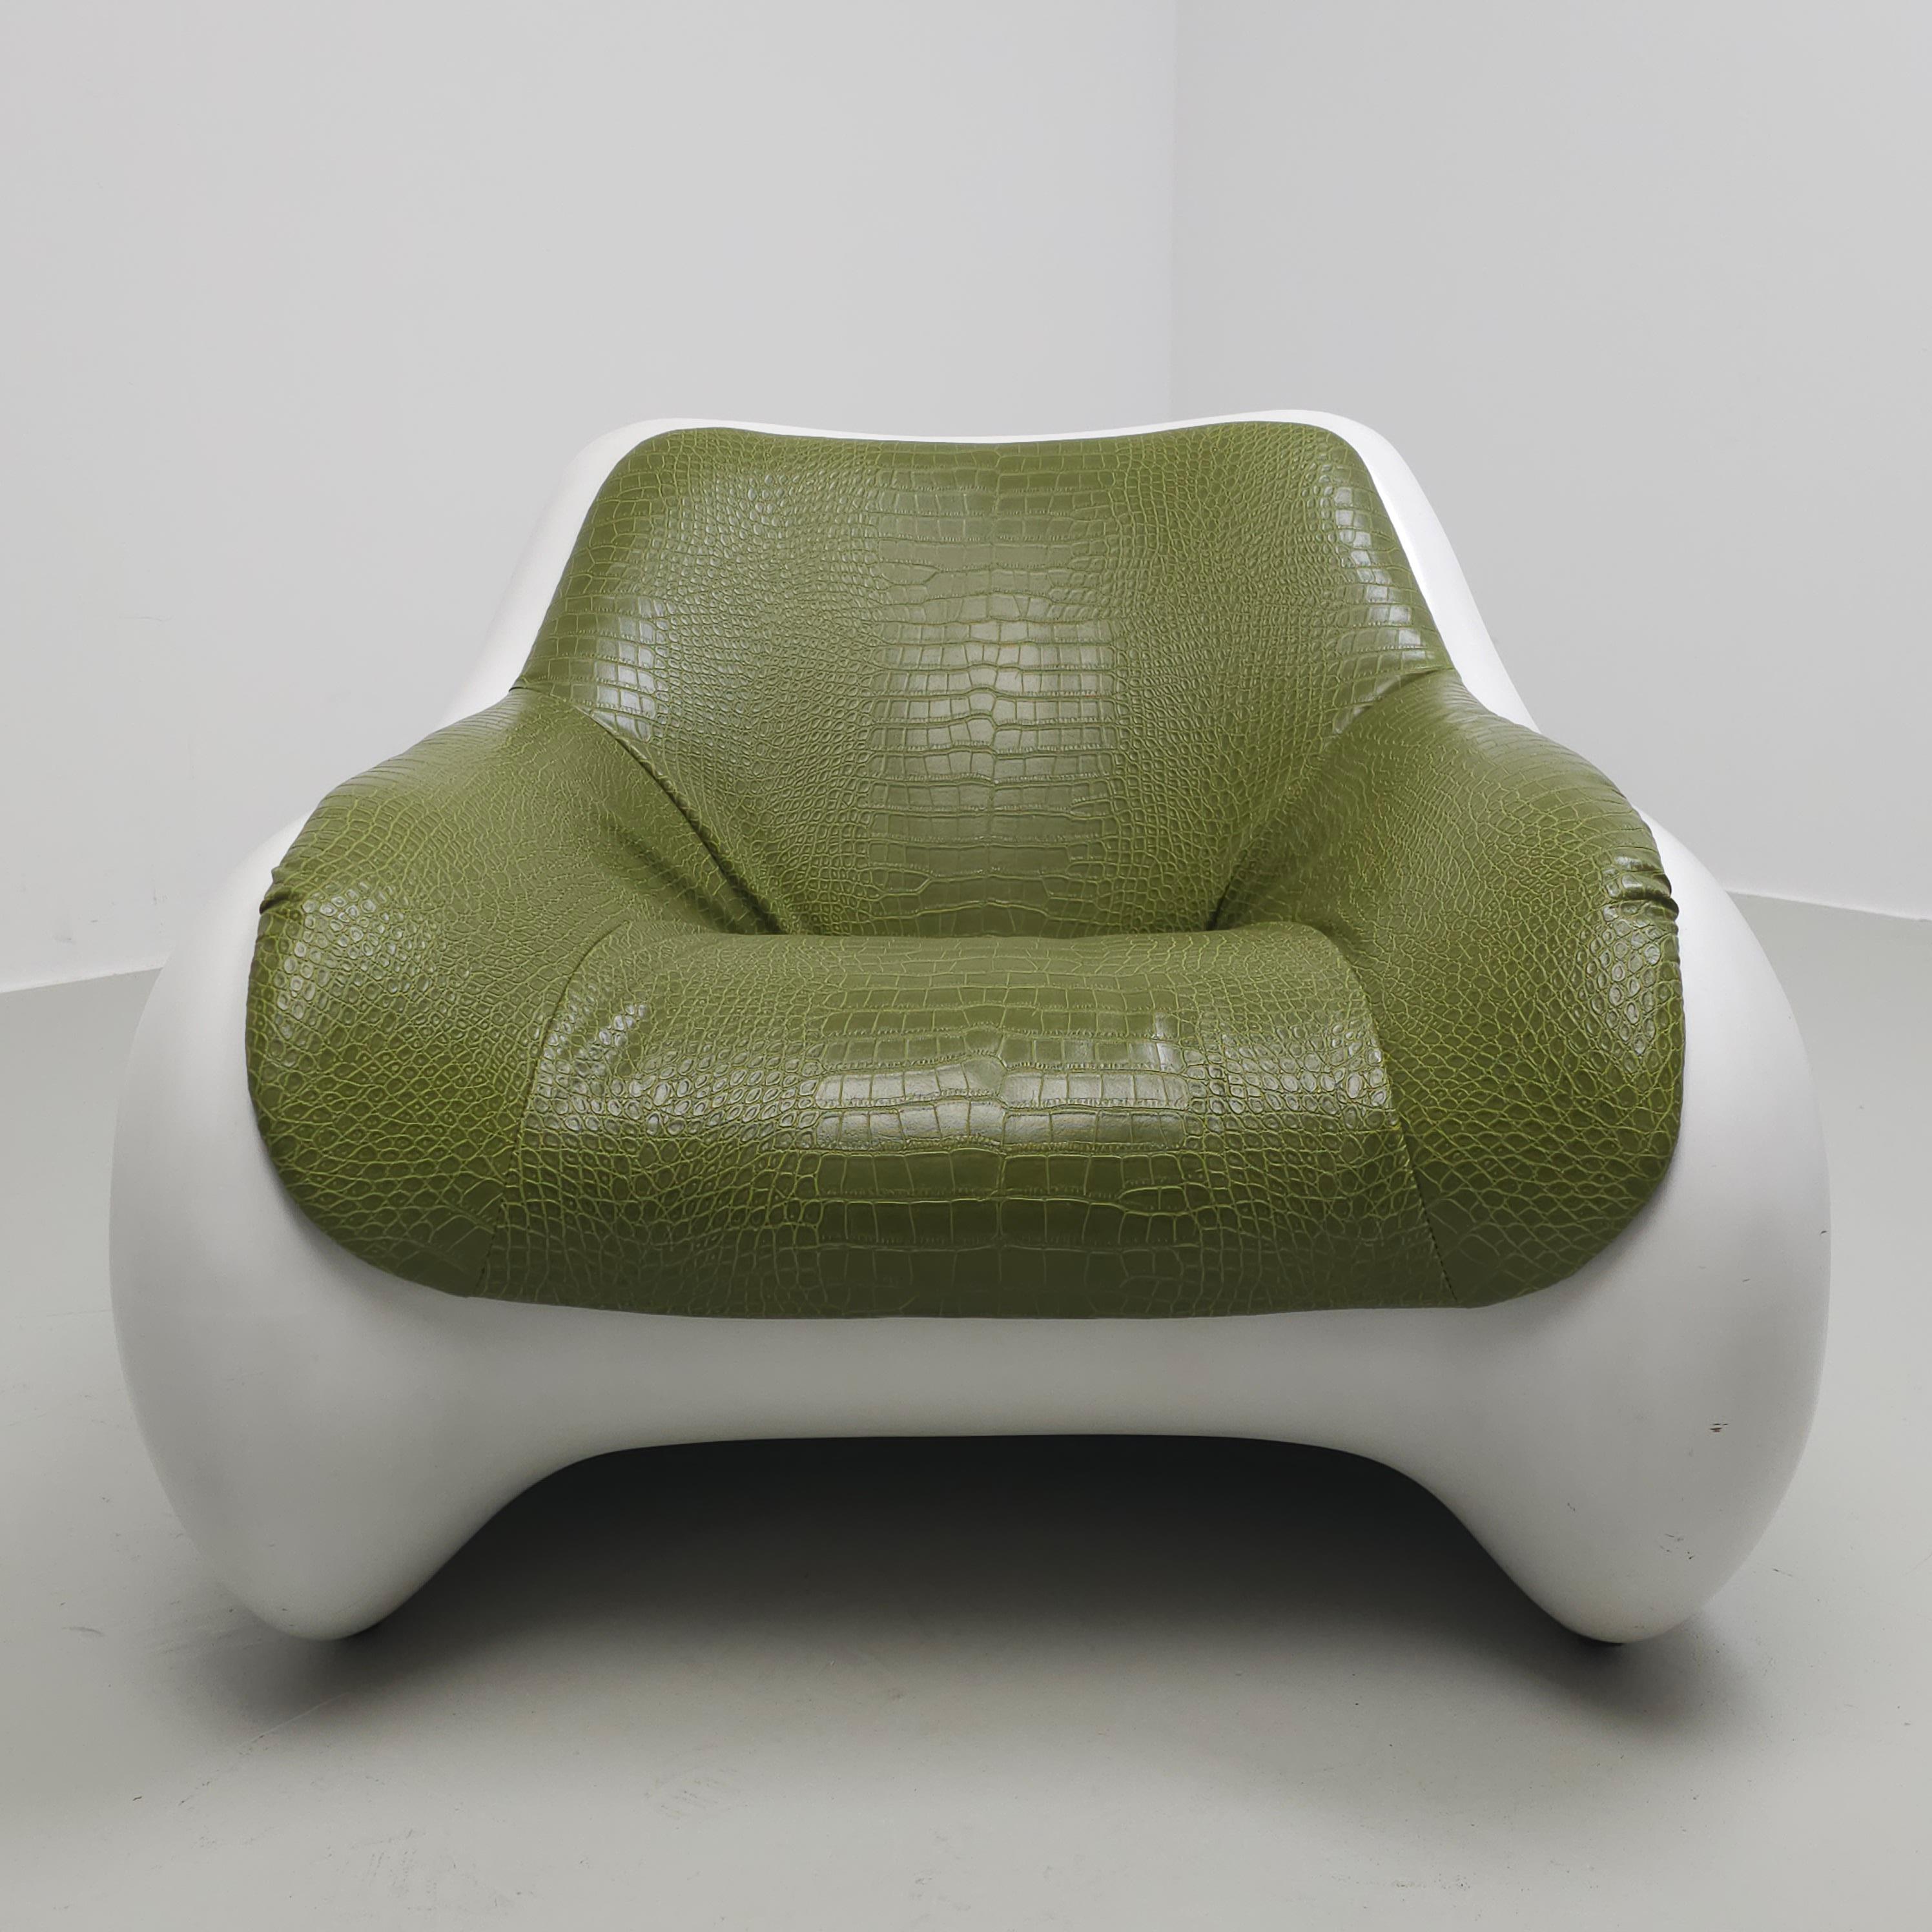 Targa chair, designed by Klaus Uredat for the Horn Collection around 1971. Moulded polyethurane chair with plastic shell, newly reupholstered with faux/fake crocodile leather